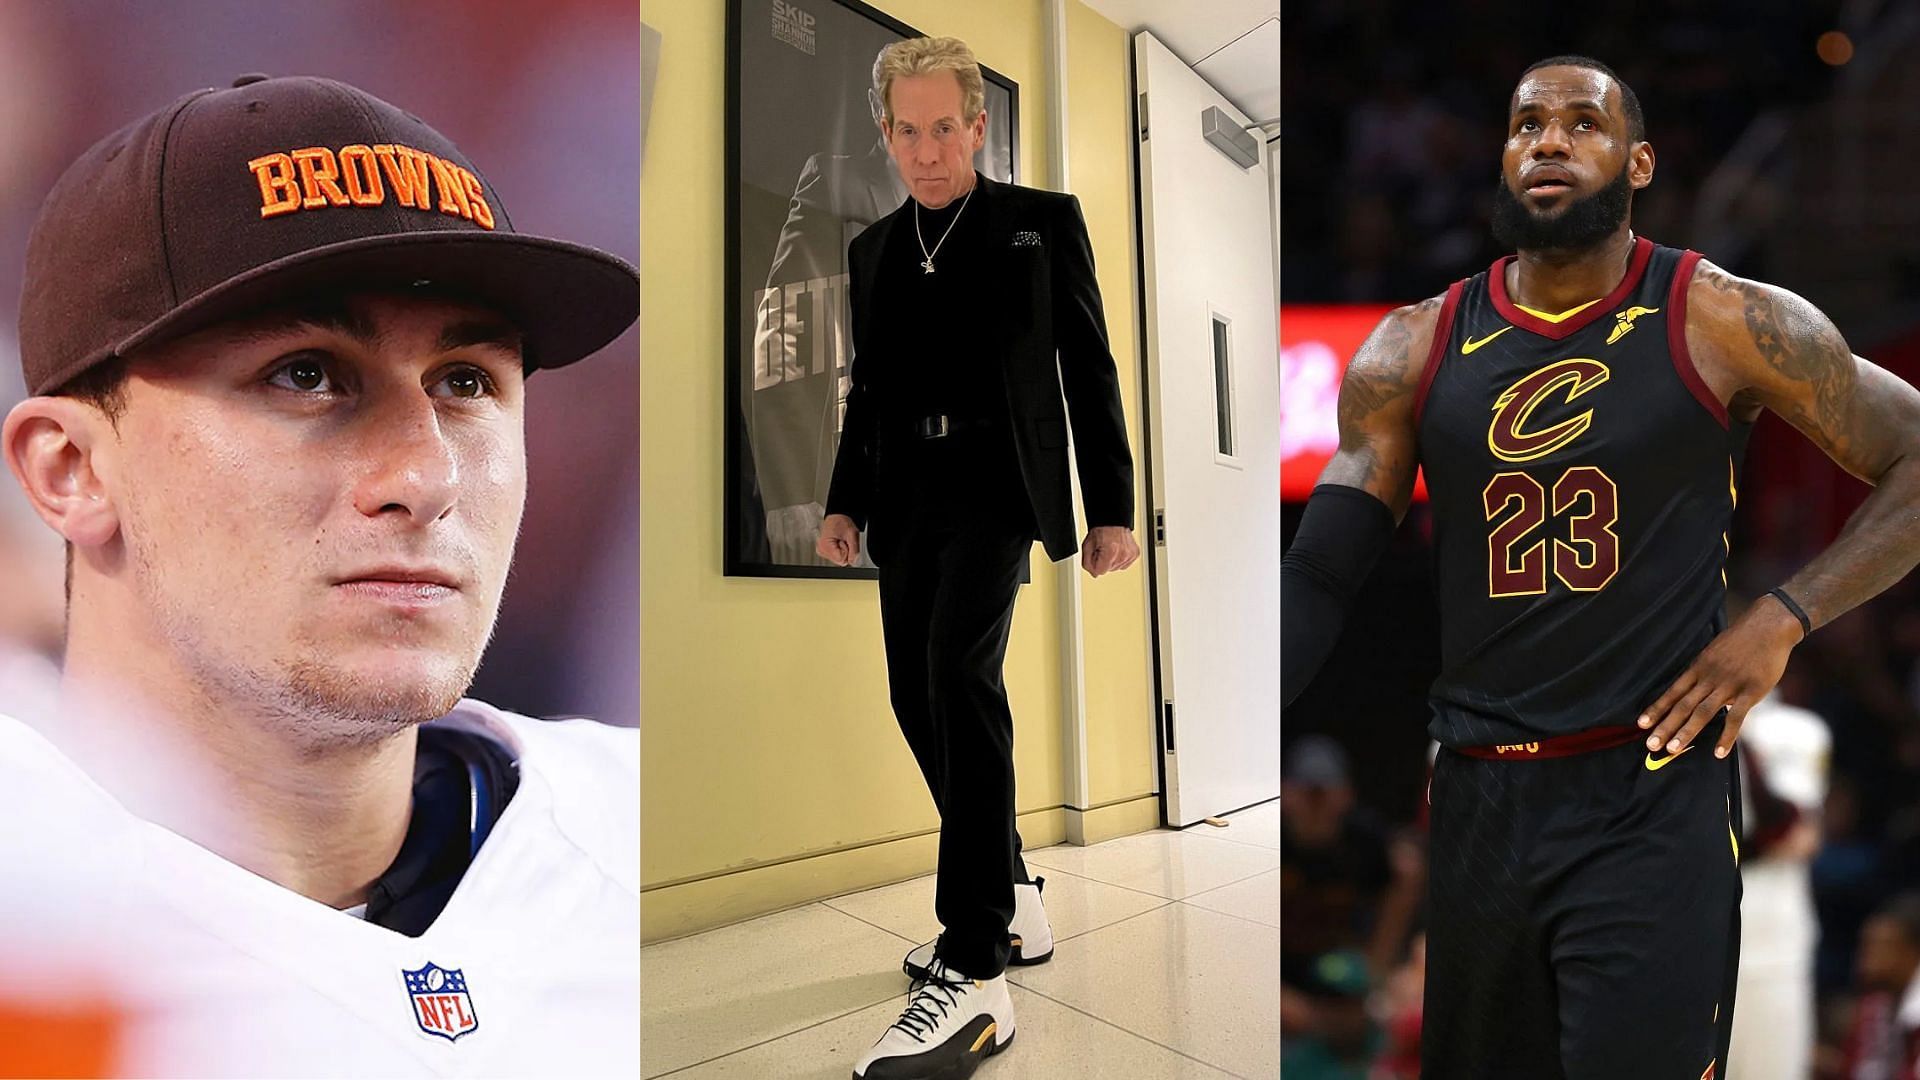 Skip Bayless once compared Johnny Manziel to LeBron James